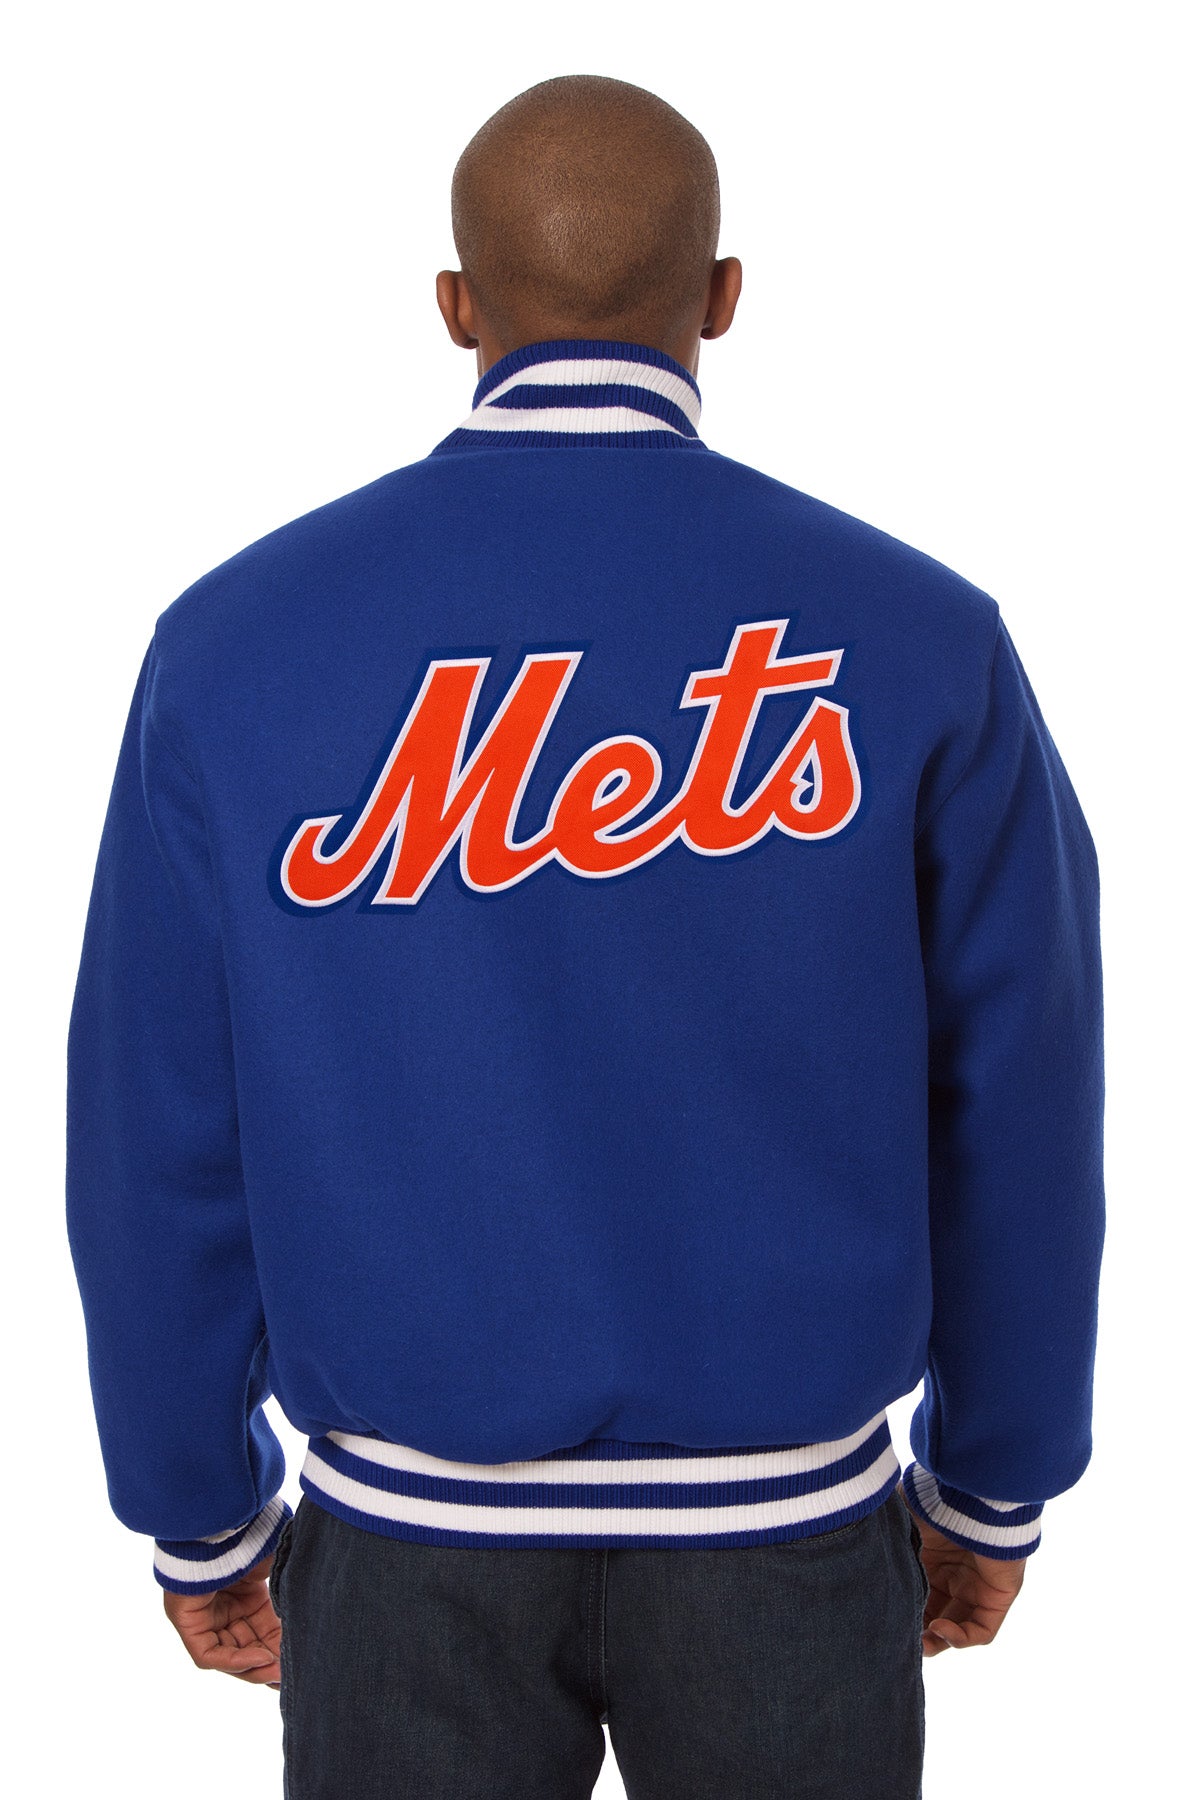 New York Mets Embroidered Wool Jacket